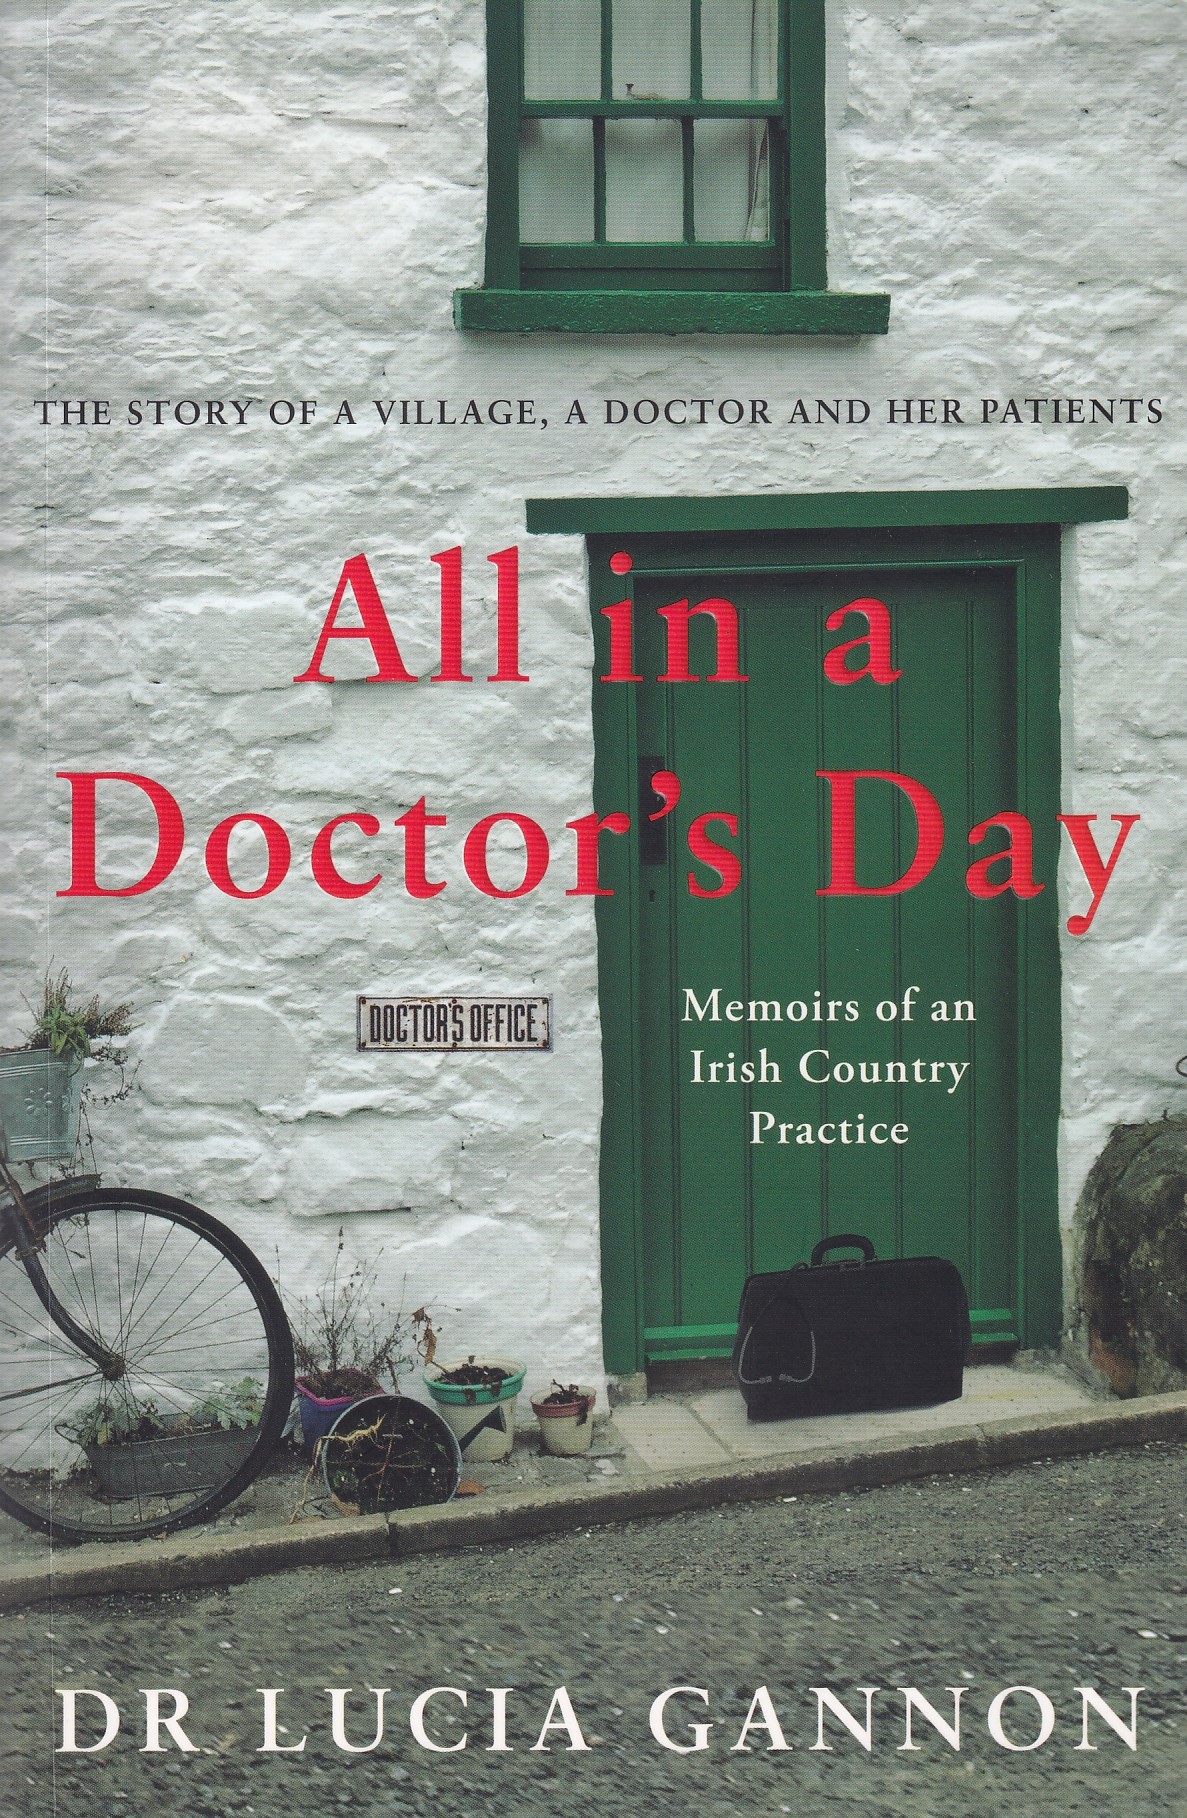 All in a Doctor’s Day: Memoirs of an Irish Country Practice | Dr Lucia Gannon | Charlie Byrne's